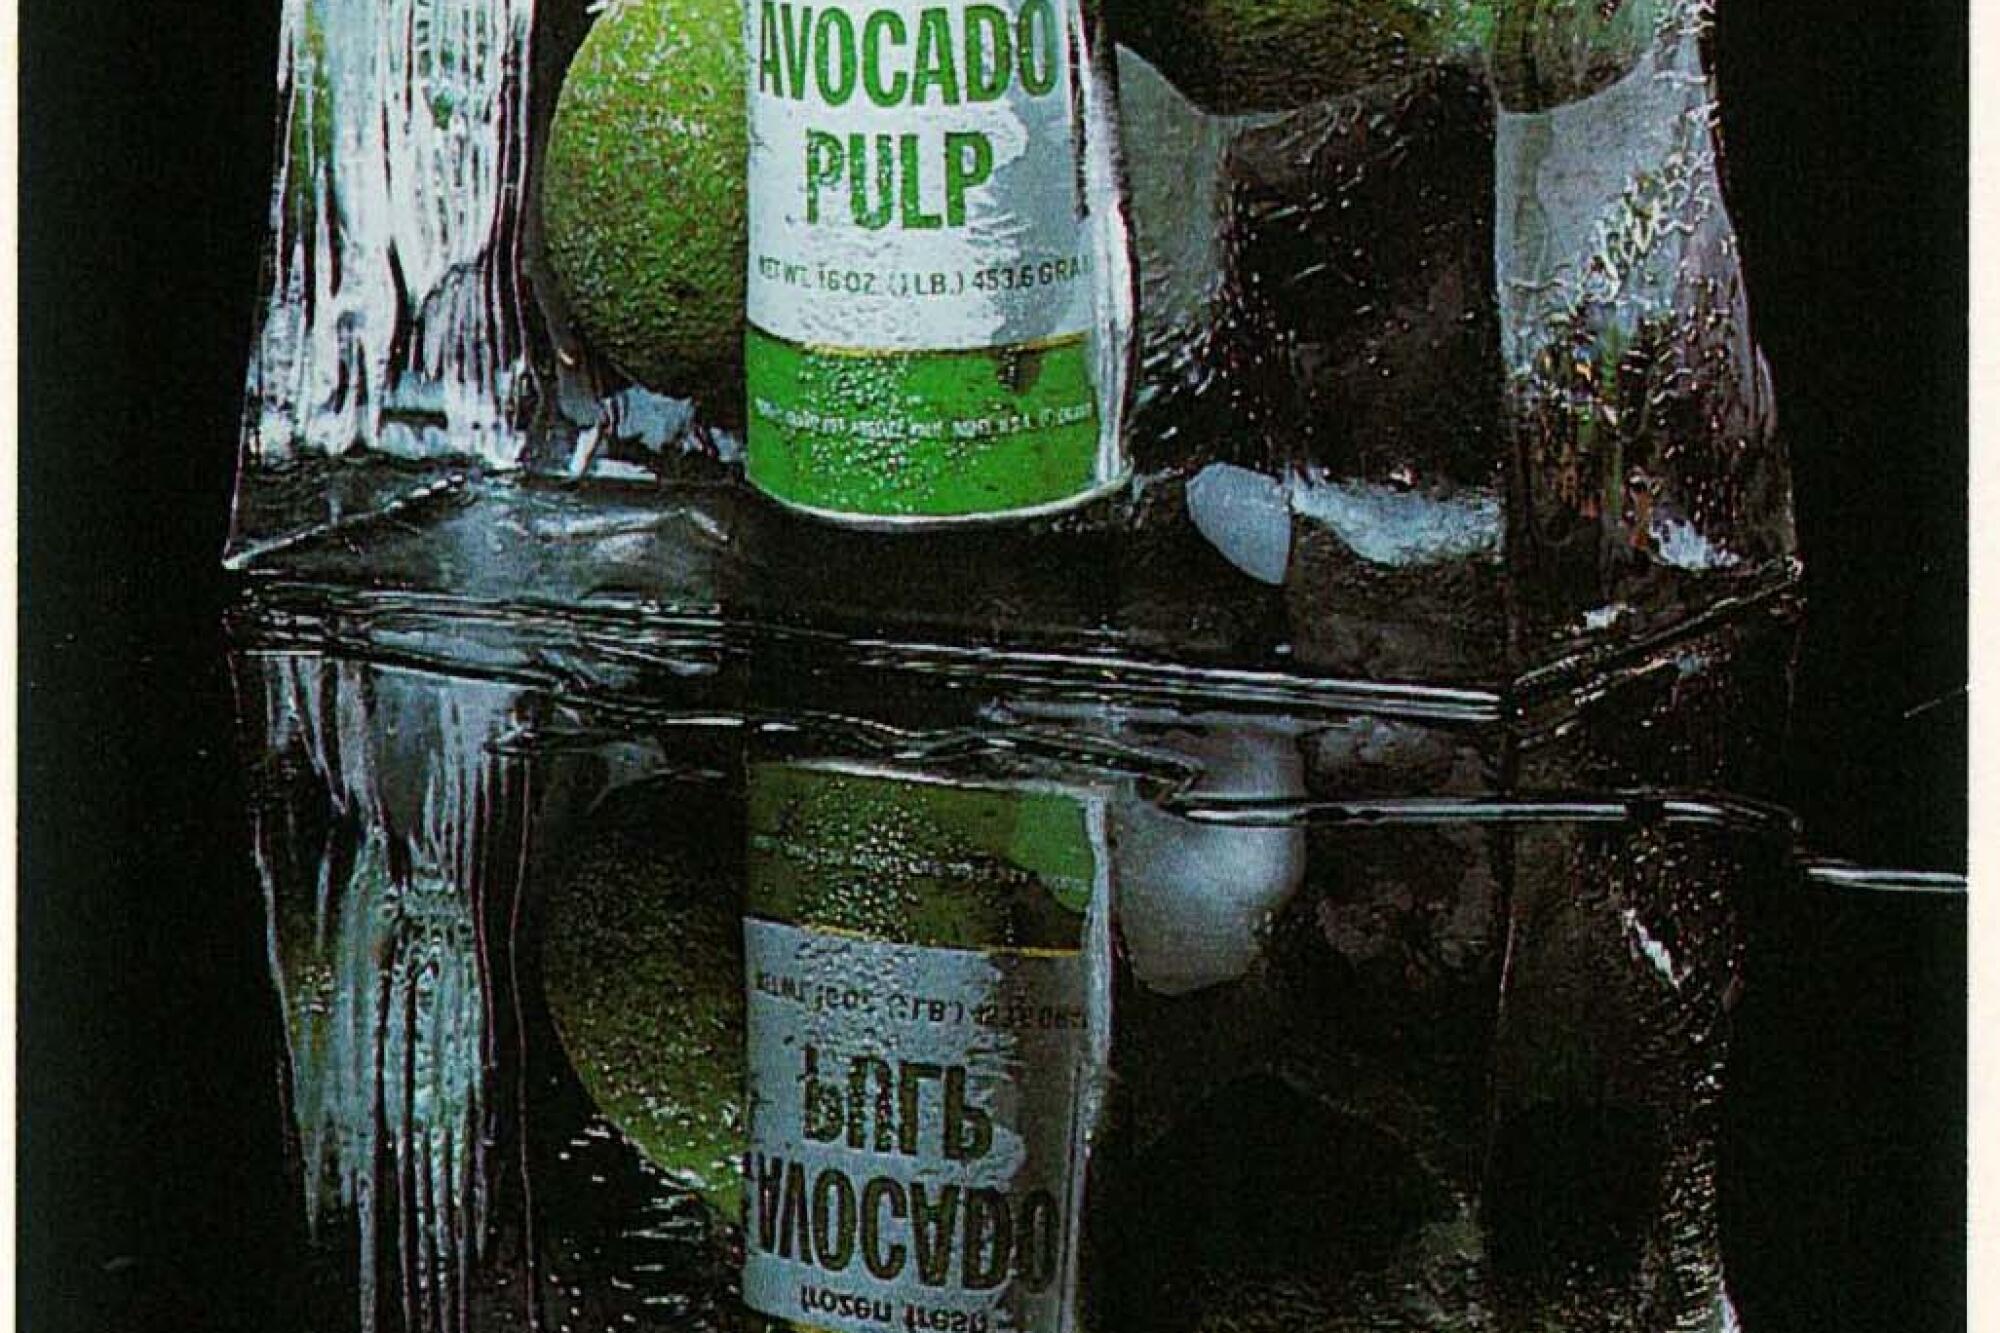 A Calavo marketing image from the 1980s for frozen avocado pulp.